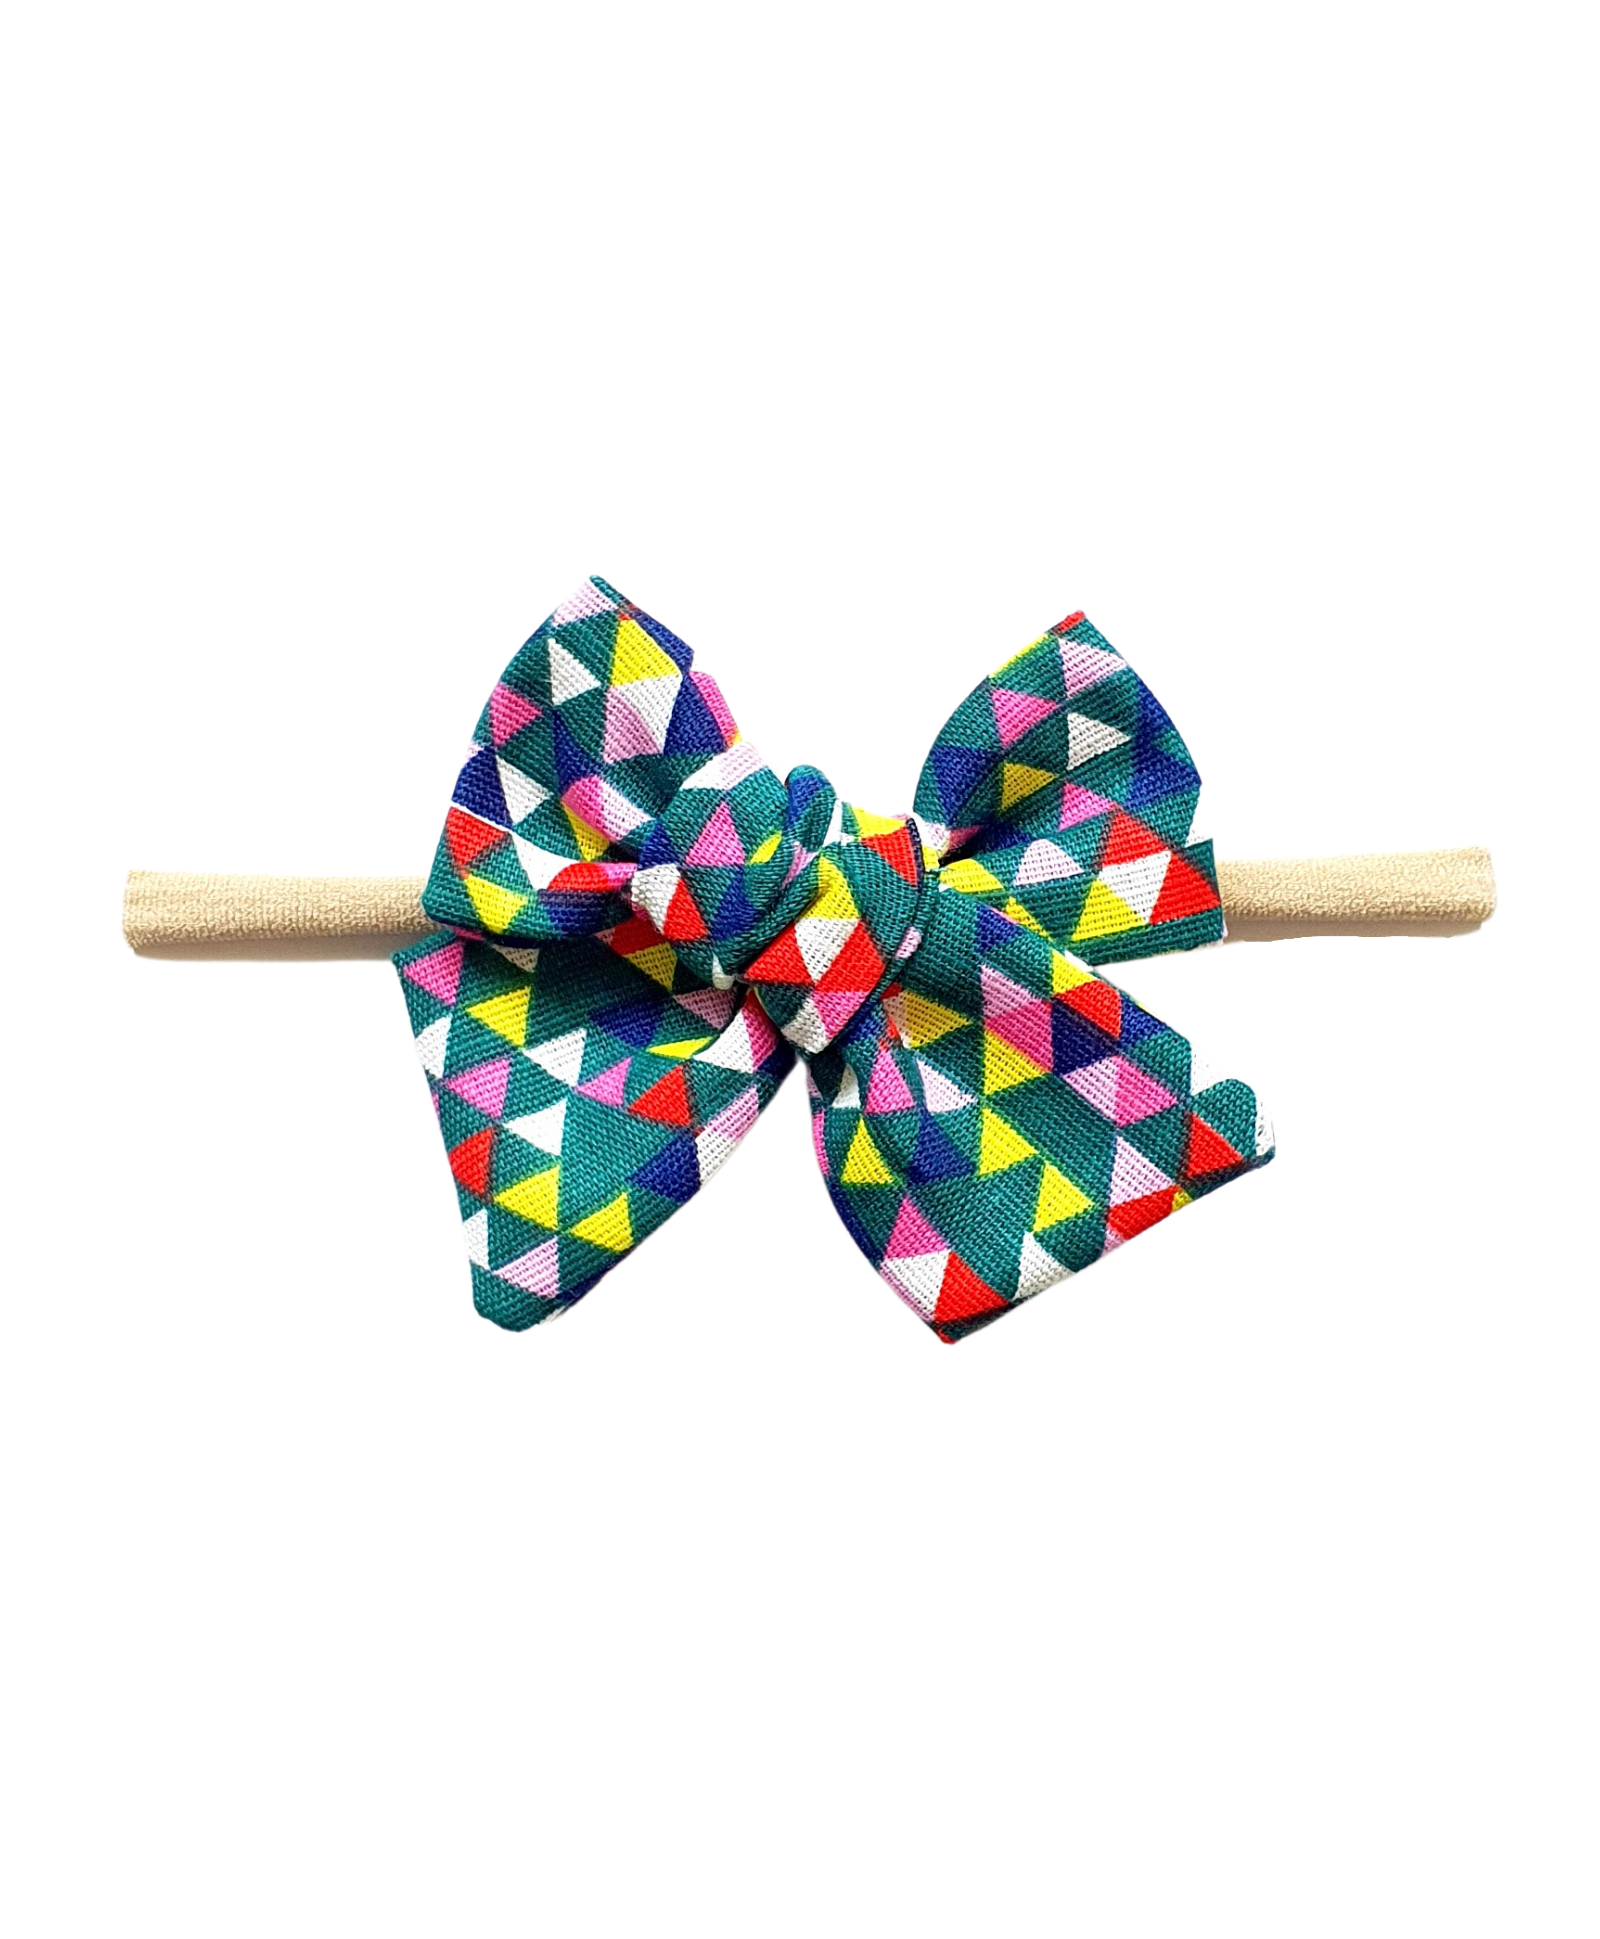 Abstract Knot Bow Headband - Multi Color